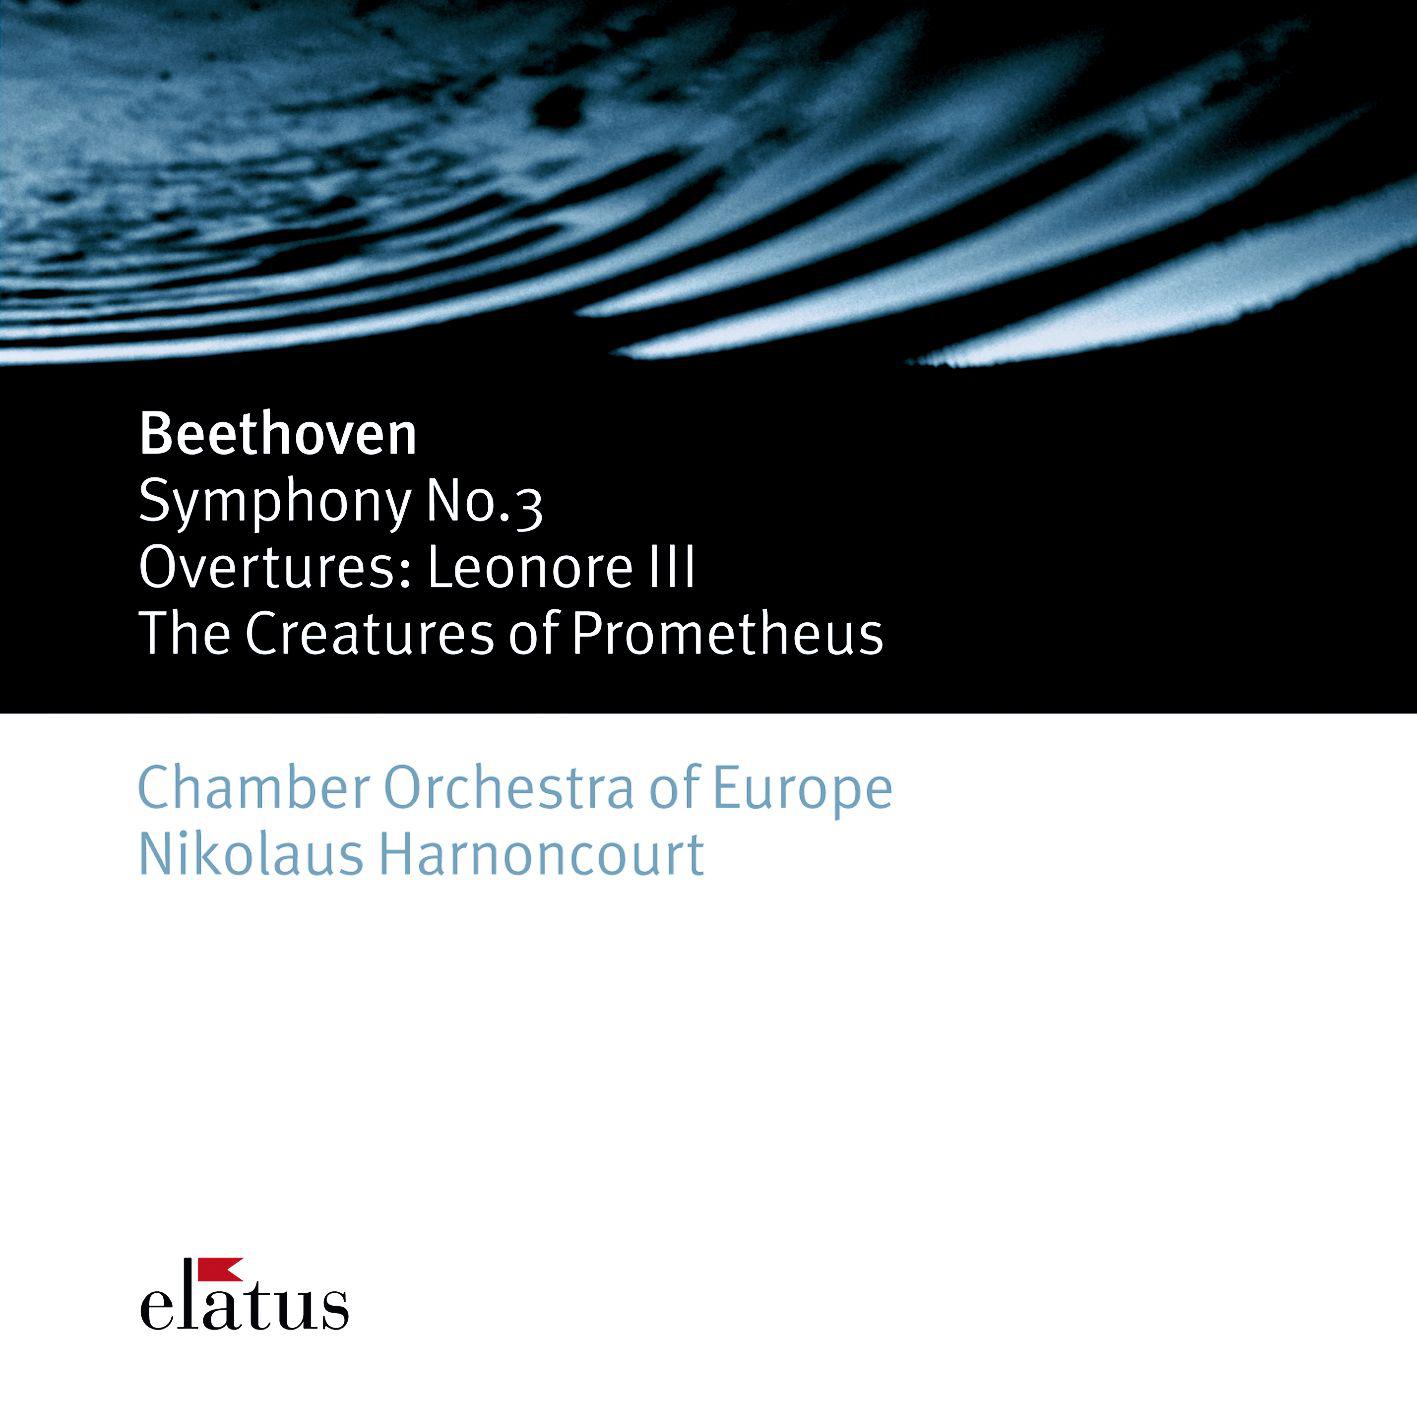 Beethoven: Symphonies Nos. 1 & 3 "Eroica" - Overtures from Leonore III and from The Creatures of Prometheus